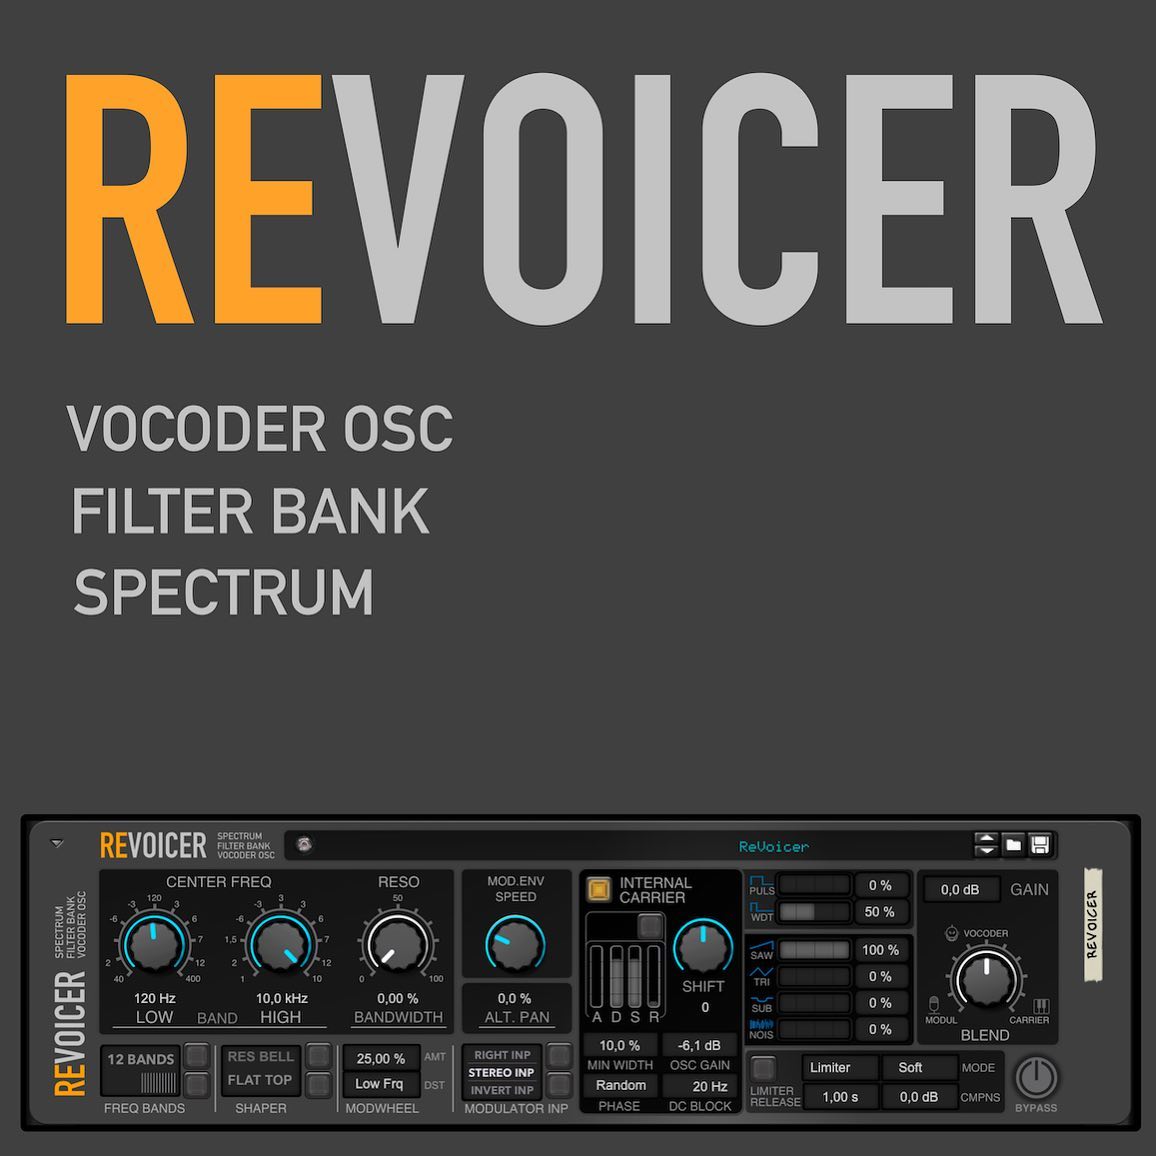 REVOICER vocoder updated to v. 2.0:
Flexible & modern VOCODER with internal Carrier / Oscillator. We update GUI and optimise internal waveforms. For Reason by ReasonStudios. 

#reason12 #turn2on #rackextension #rackextensions #reasonrack #plugin #vocoder #intergalactic #voice #spectrumfilterbank